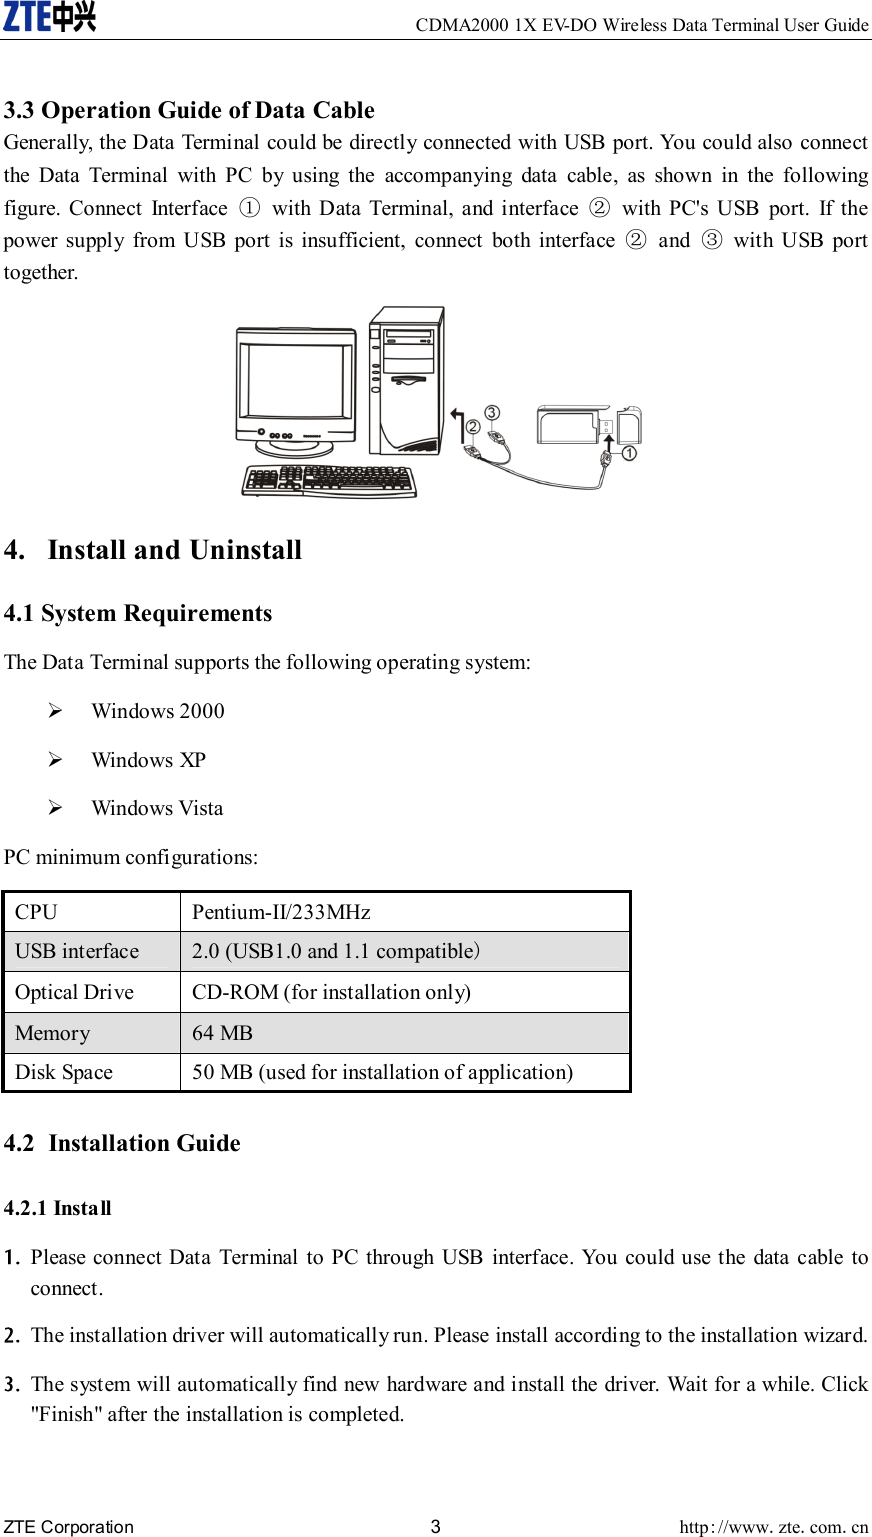     CDMA2000 1X EV-DO Wireless Data Terminal User Guide ZTE Corporation 3 http://www.zte.com.cn   3.3 Operation Guide of Data Cable Generally, the Data Terminal could be directly connected with USB port. You could also connect the Data Terminal with PC by using the accompanying data cable, as shown in the following figure. Connect Interface ①  with Data Terminal, and interface ②  with PC&apos;s USB port. If the power supply from USB port is insufficient, connect both interface ② and ③ with USB port together.  4. Install and Uninstall 4.1 System Requirements The Data Terminal supports the following operating system: ¾ Windows 2000 ¾ Windows XP ¾ Windows Vista PC minimum configurations: CPU Pentium-II/233MHz USB interface    2.0 (USB1.0 and 1.1 compatible) Optical Drive    CD-ROM (for installation only)   Memory   64 MB   Disk Space    50 MB (used for installation of application)  4.2 Installation Guide 4.2.1 Install 1. Please connect Data Terminal to PC through USB interface. You could use the data cable to connect. 2. The installation driver will automatically run. Please install according to the installation wizard. 3. The system will automatically find new hardware and install the driver. Wait for a while. Click &quot;Finish&quot; after the installation is completed. 